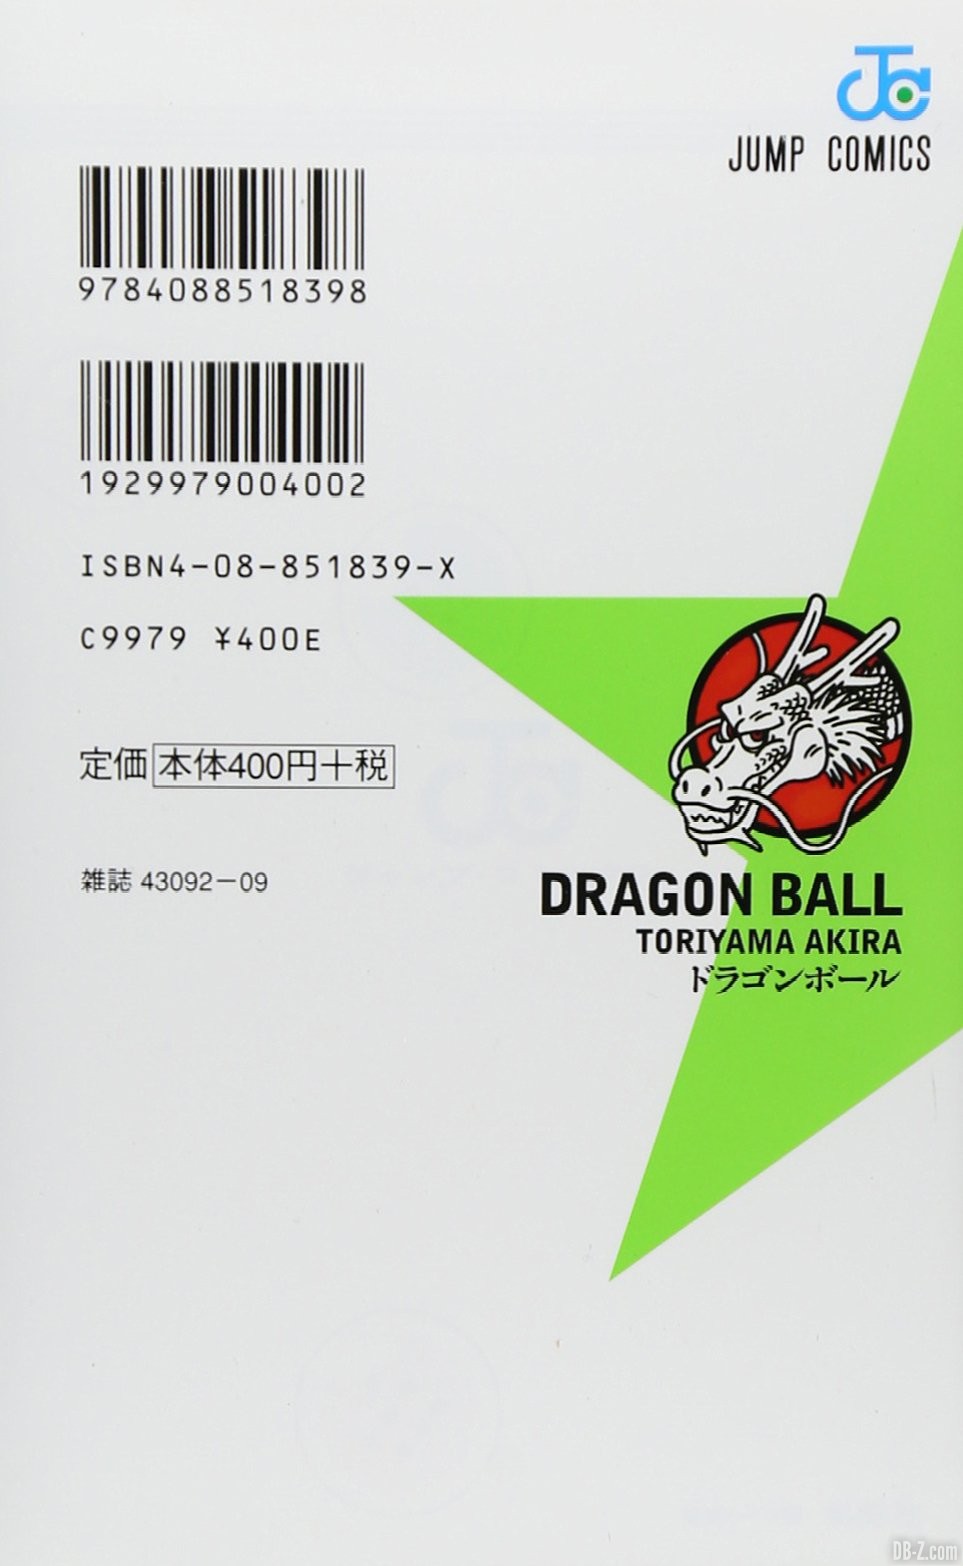 Dragon Ball Tome 9 Cover arriere